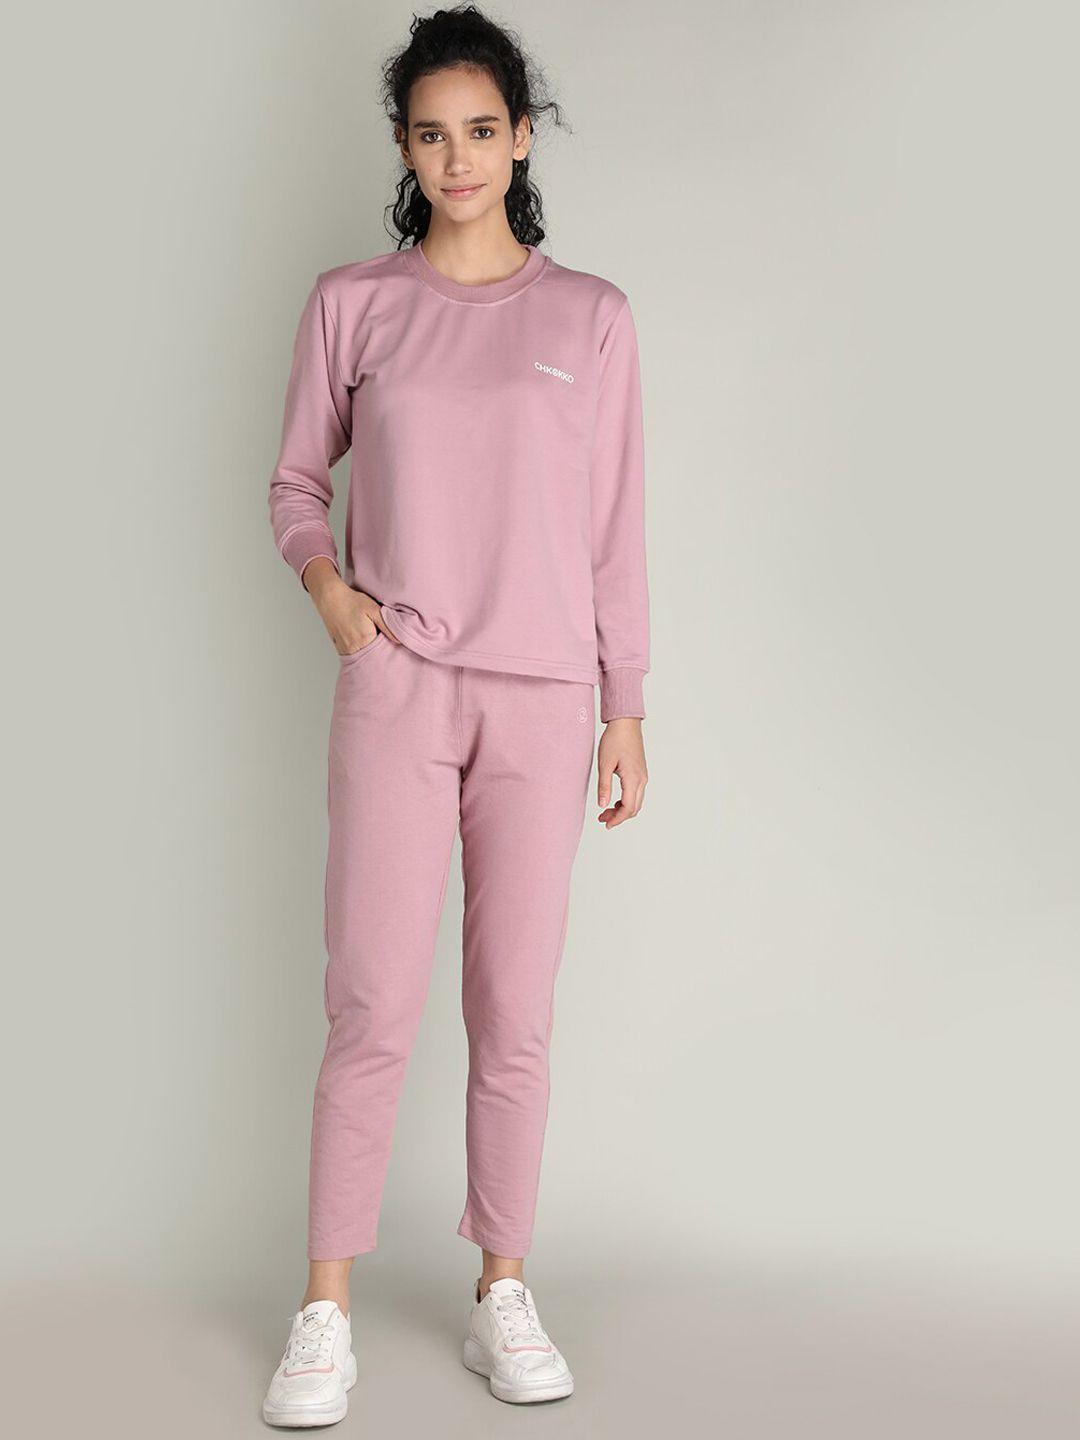 chkokko women pink solid co-ord sets